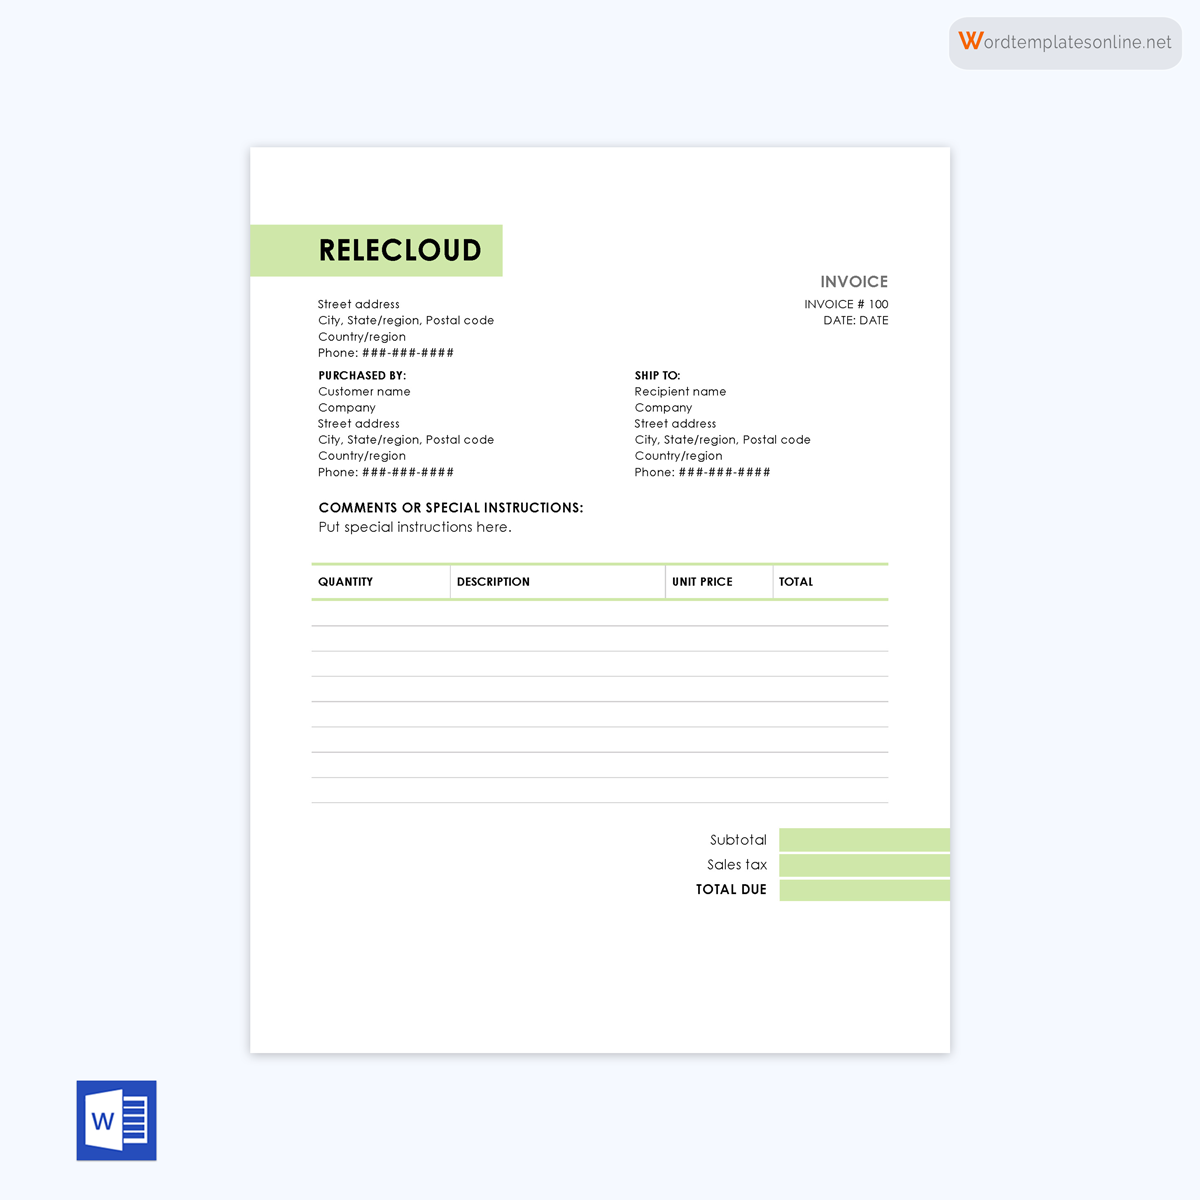 Free invoice template sample - Download now!